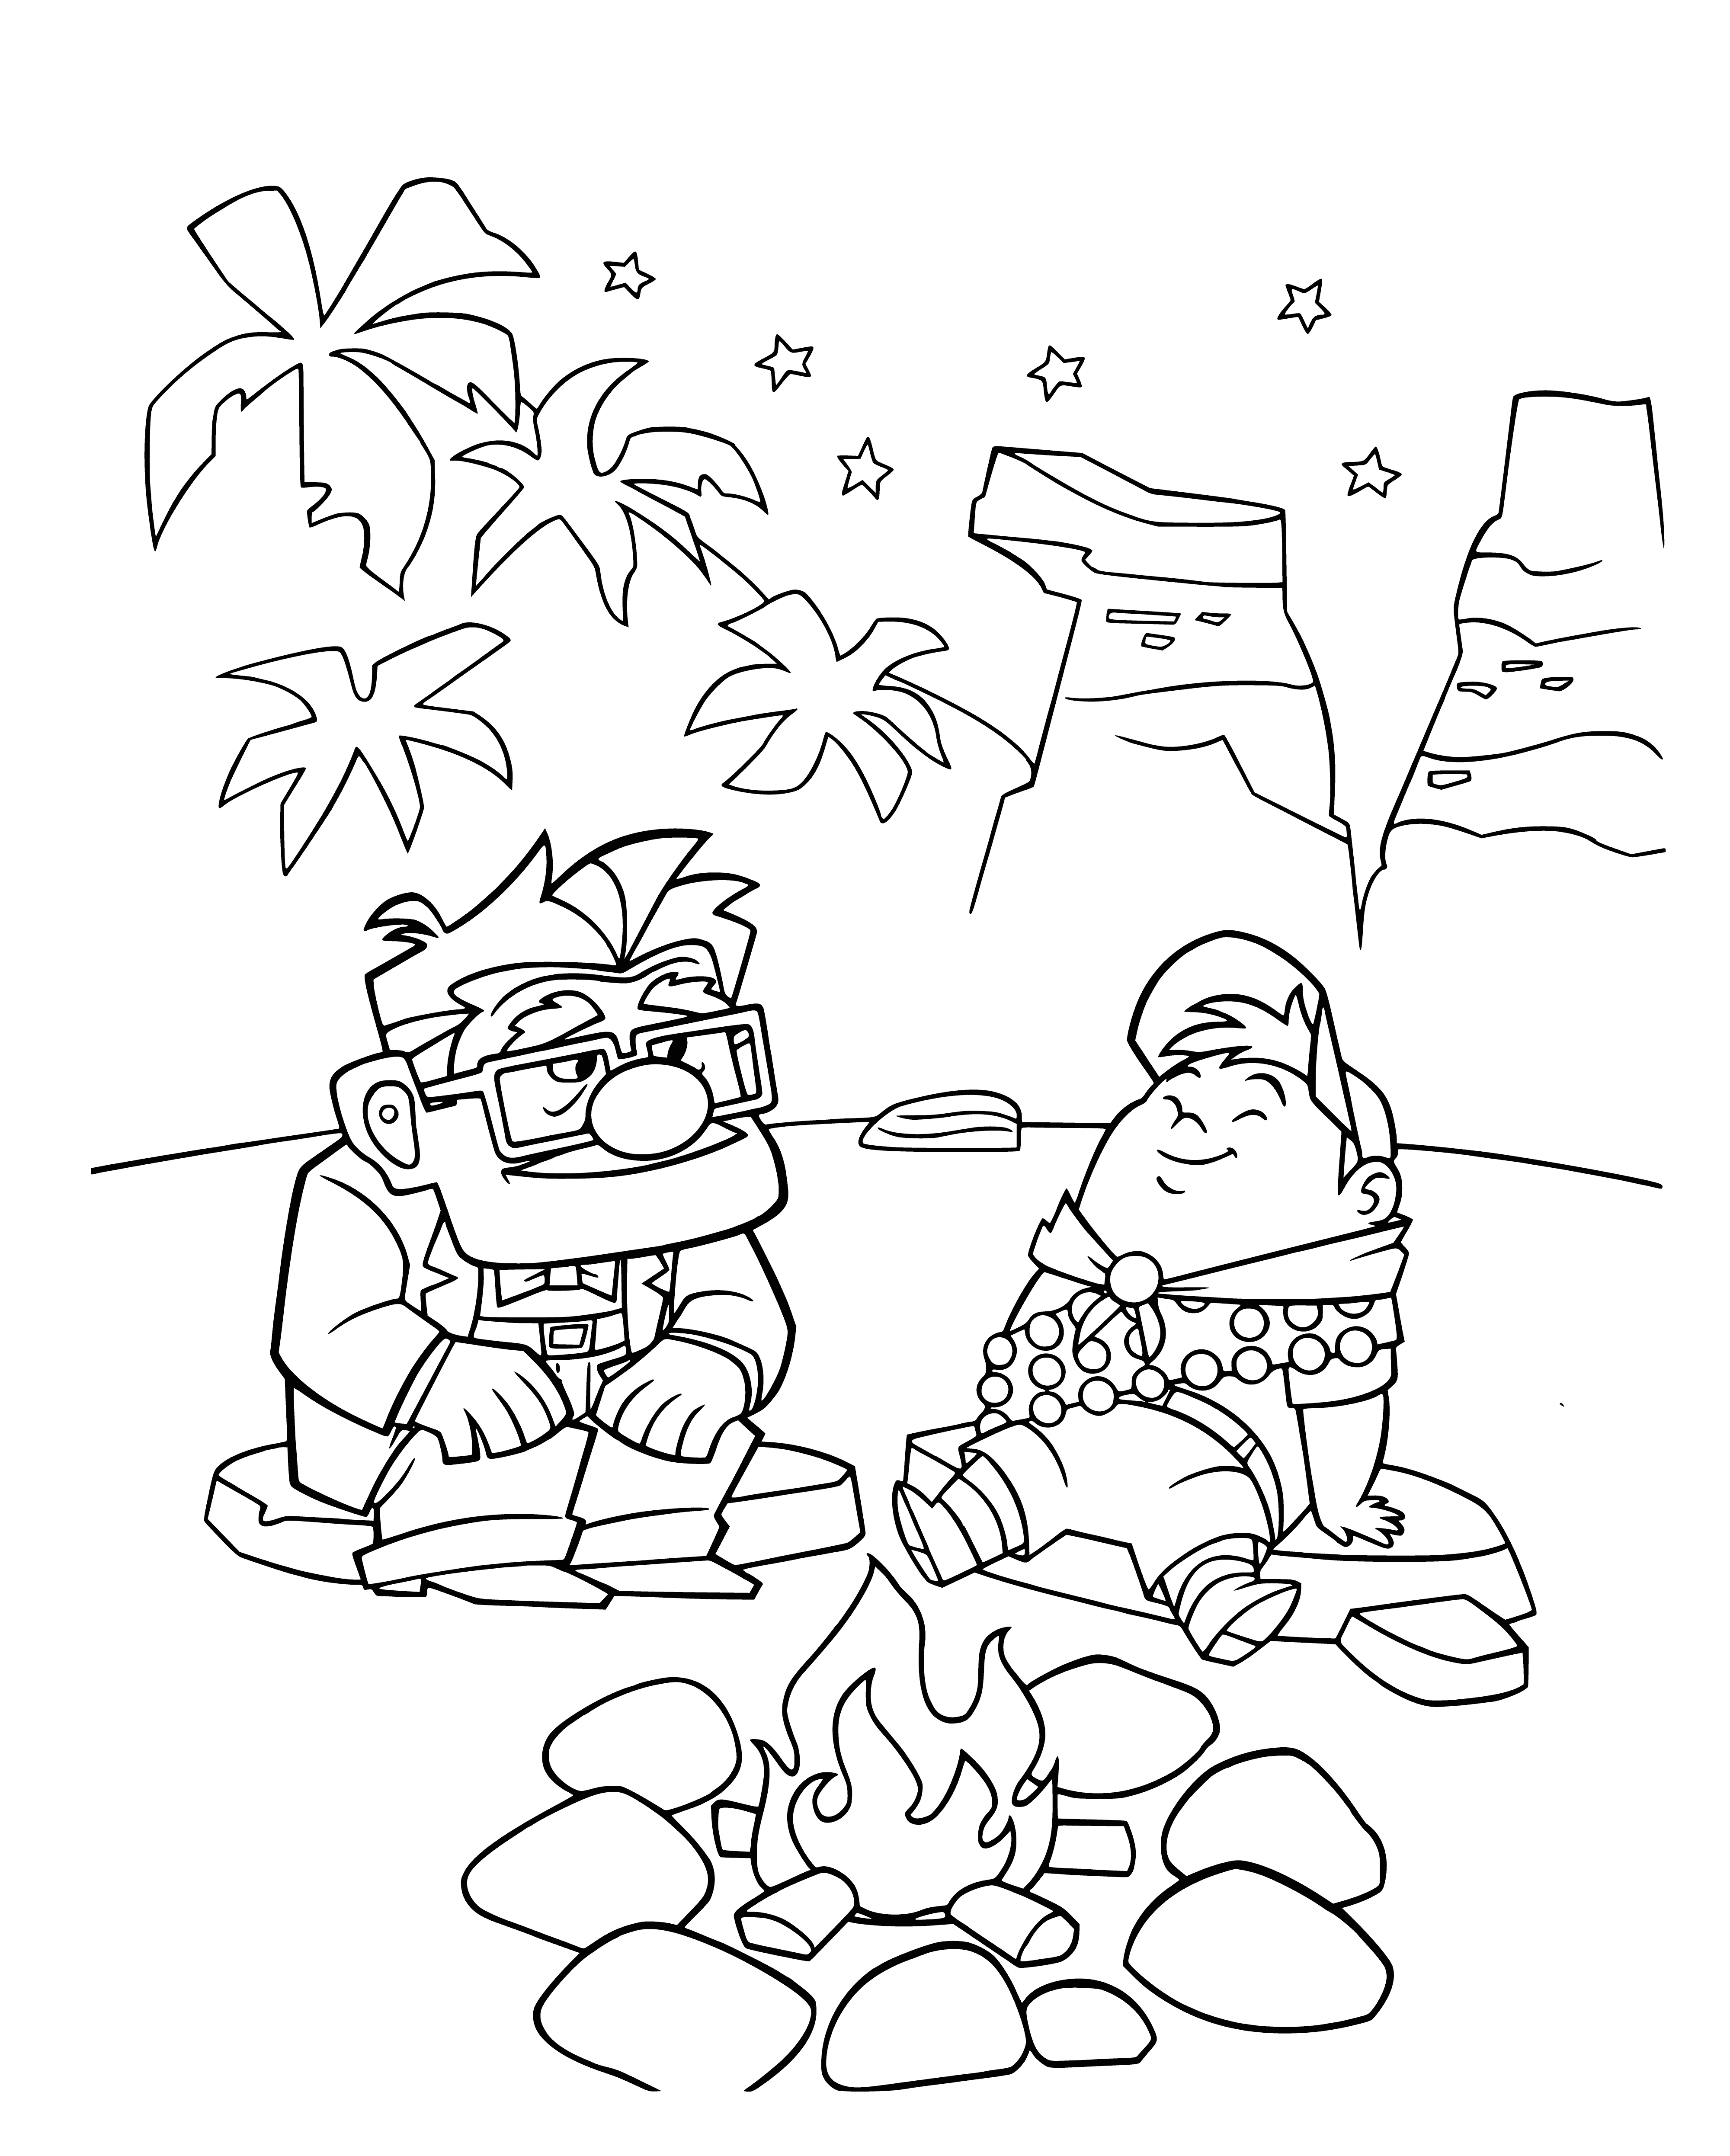 coloring page: People gathering around a bonfire in a field, some sitting, some standing, trees in the background.